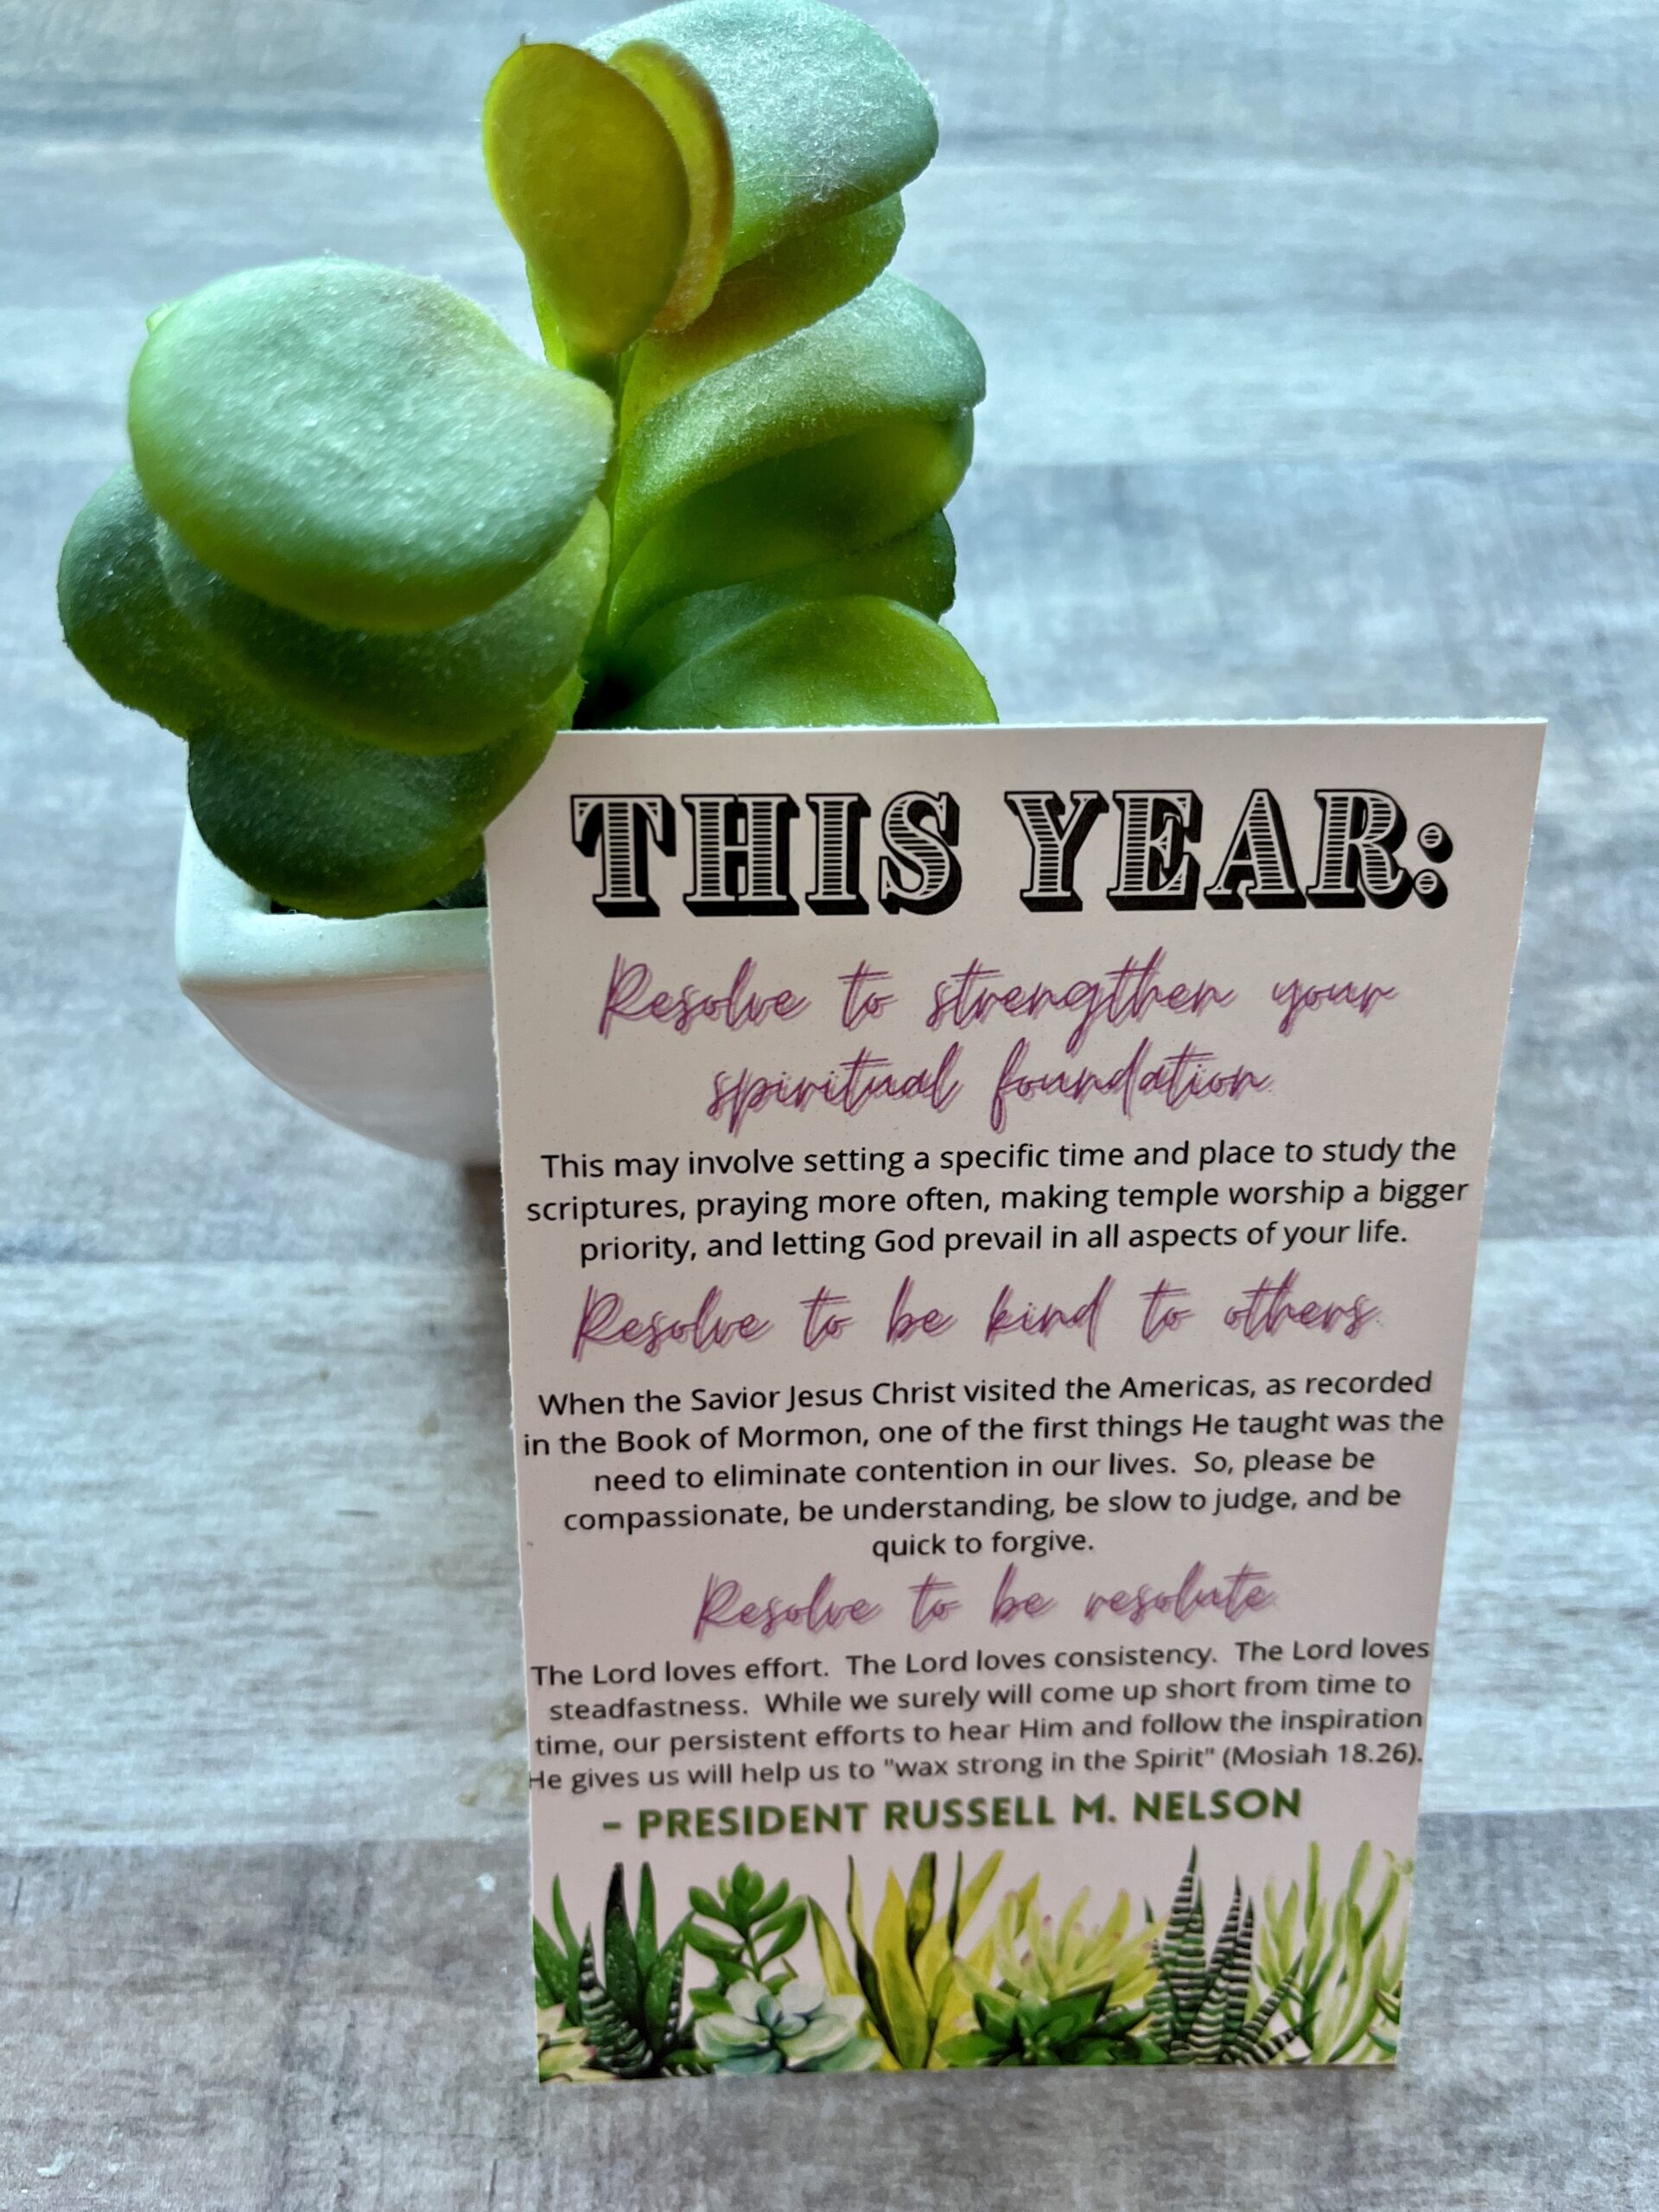 New Years’ Resolutions + NEW! Printable!